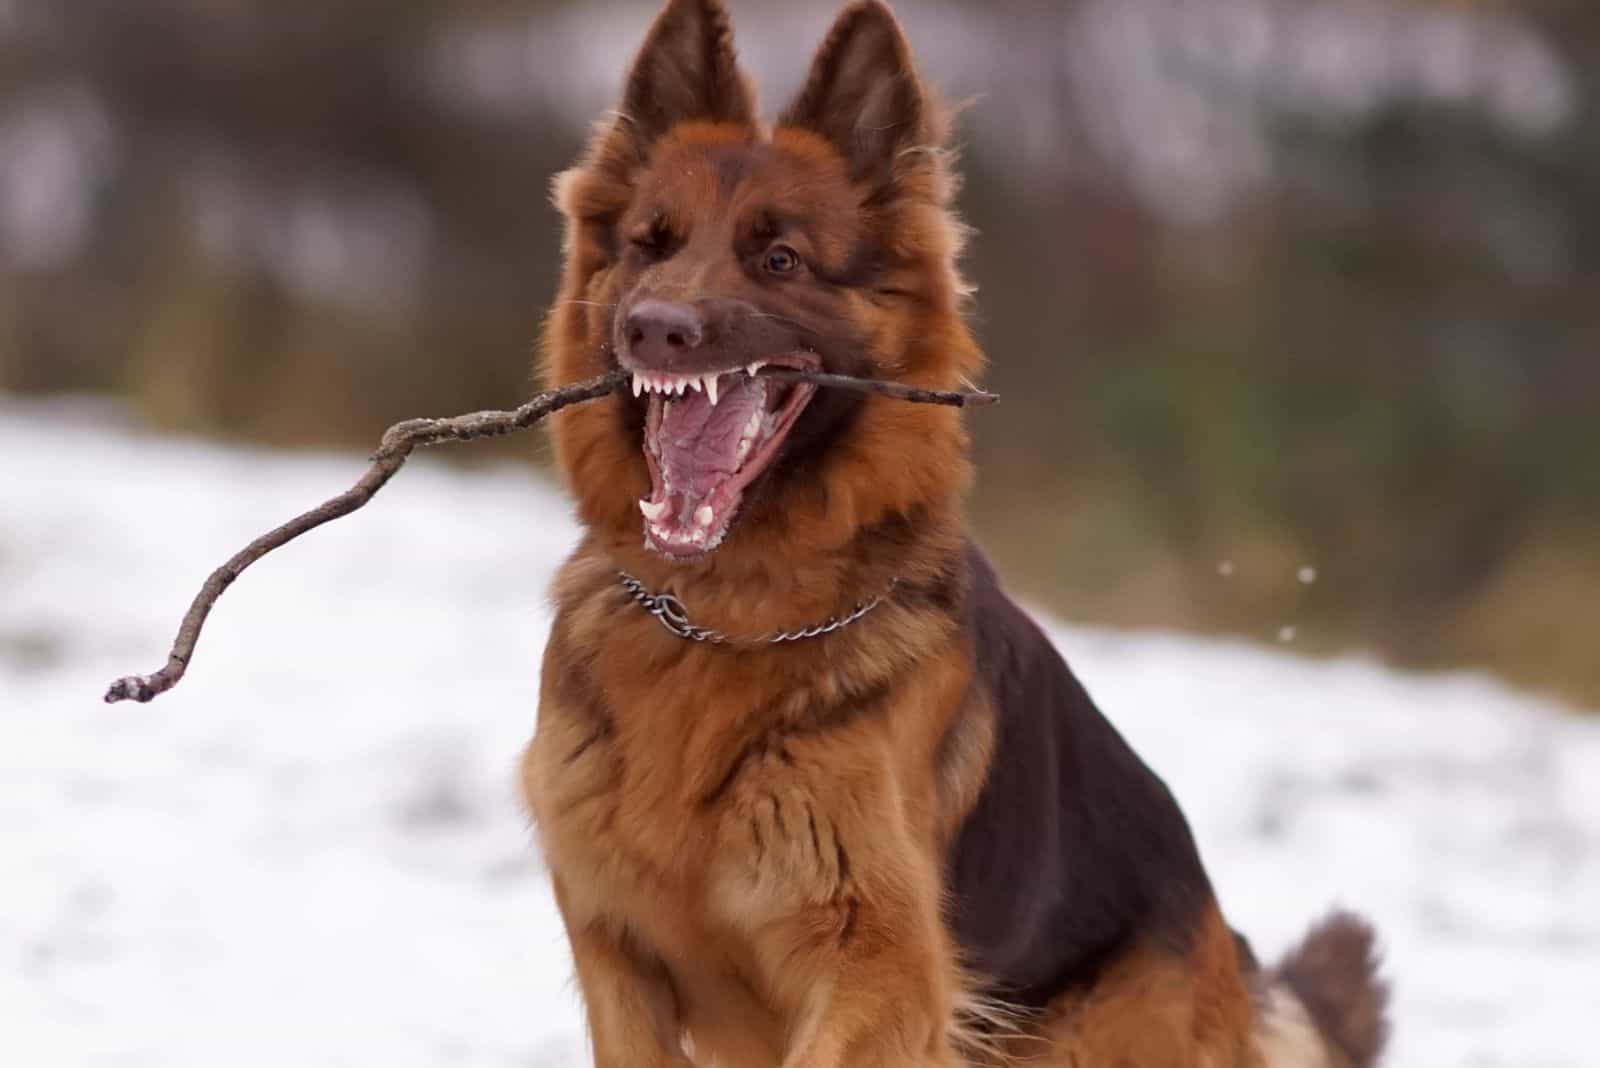 Funny GSD with a chain collar posing outdoors standing on a snow in winter